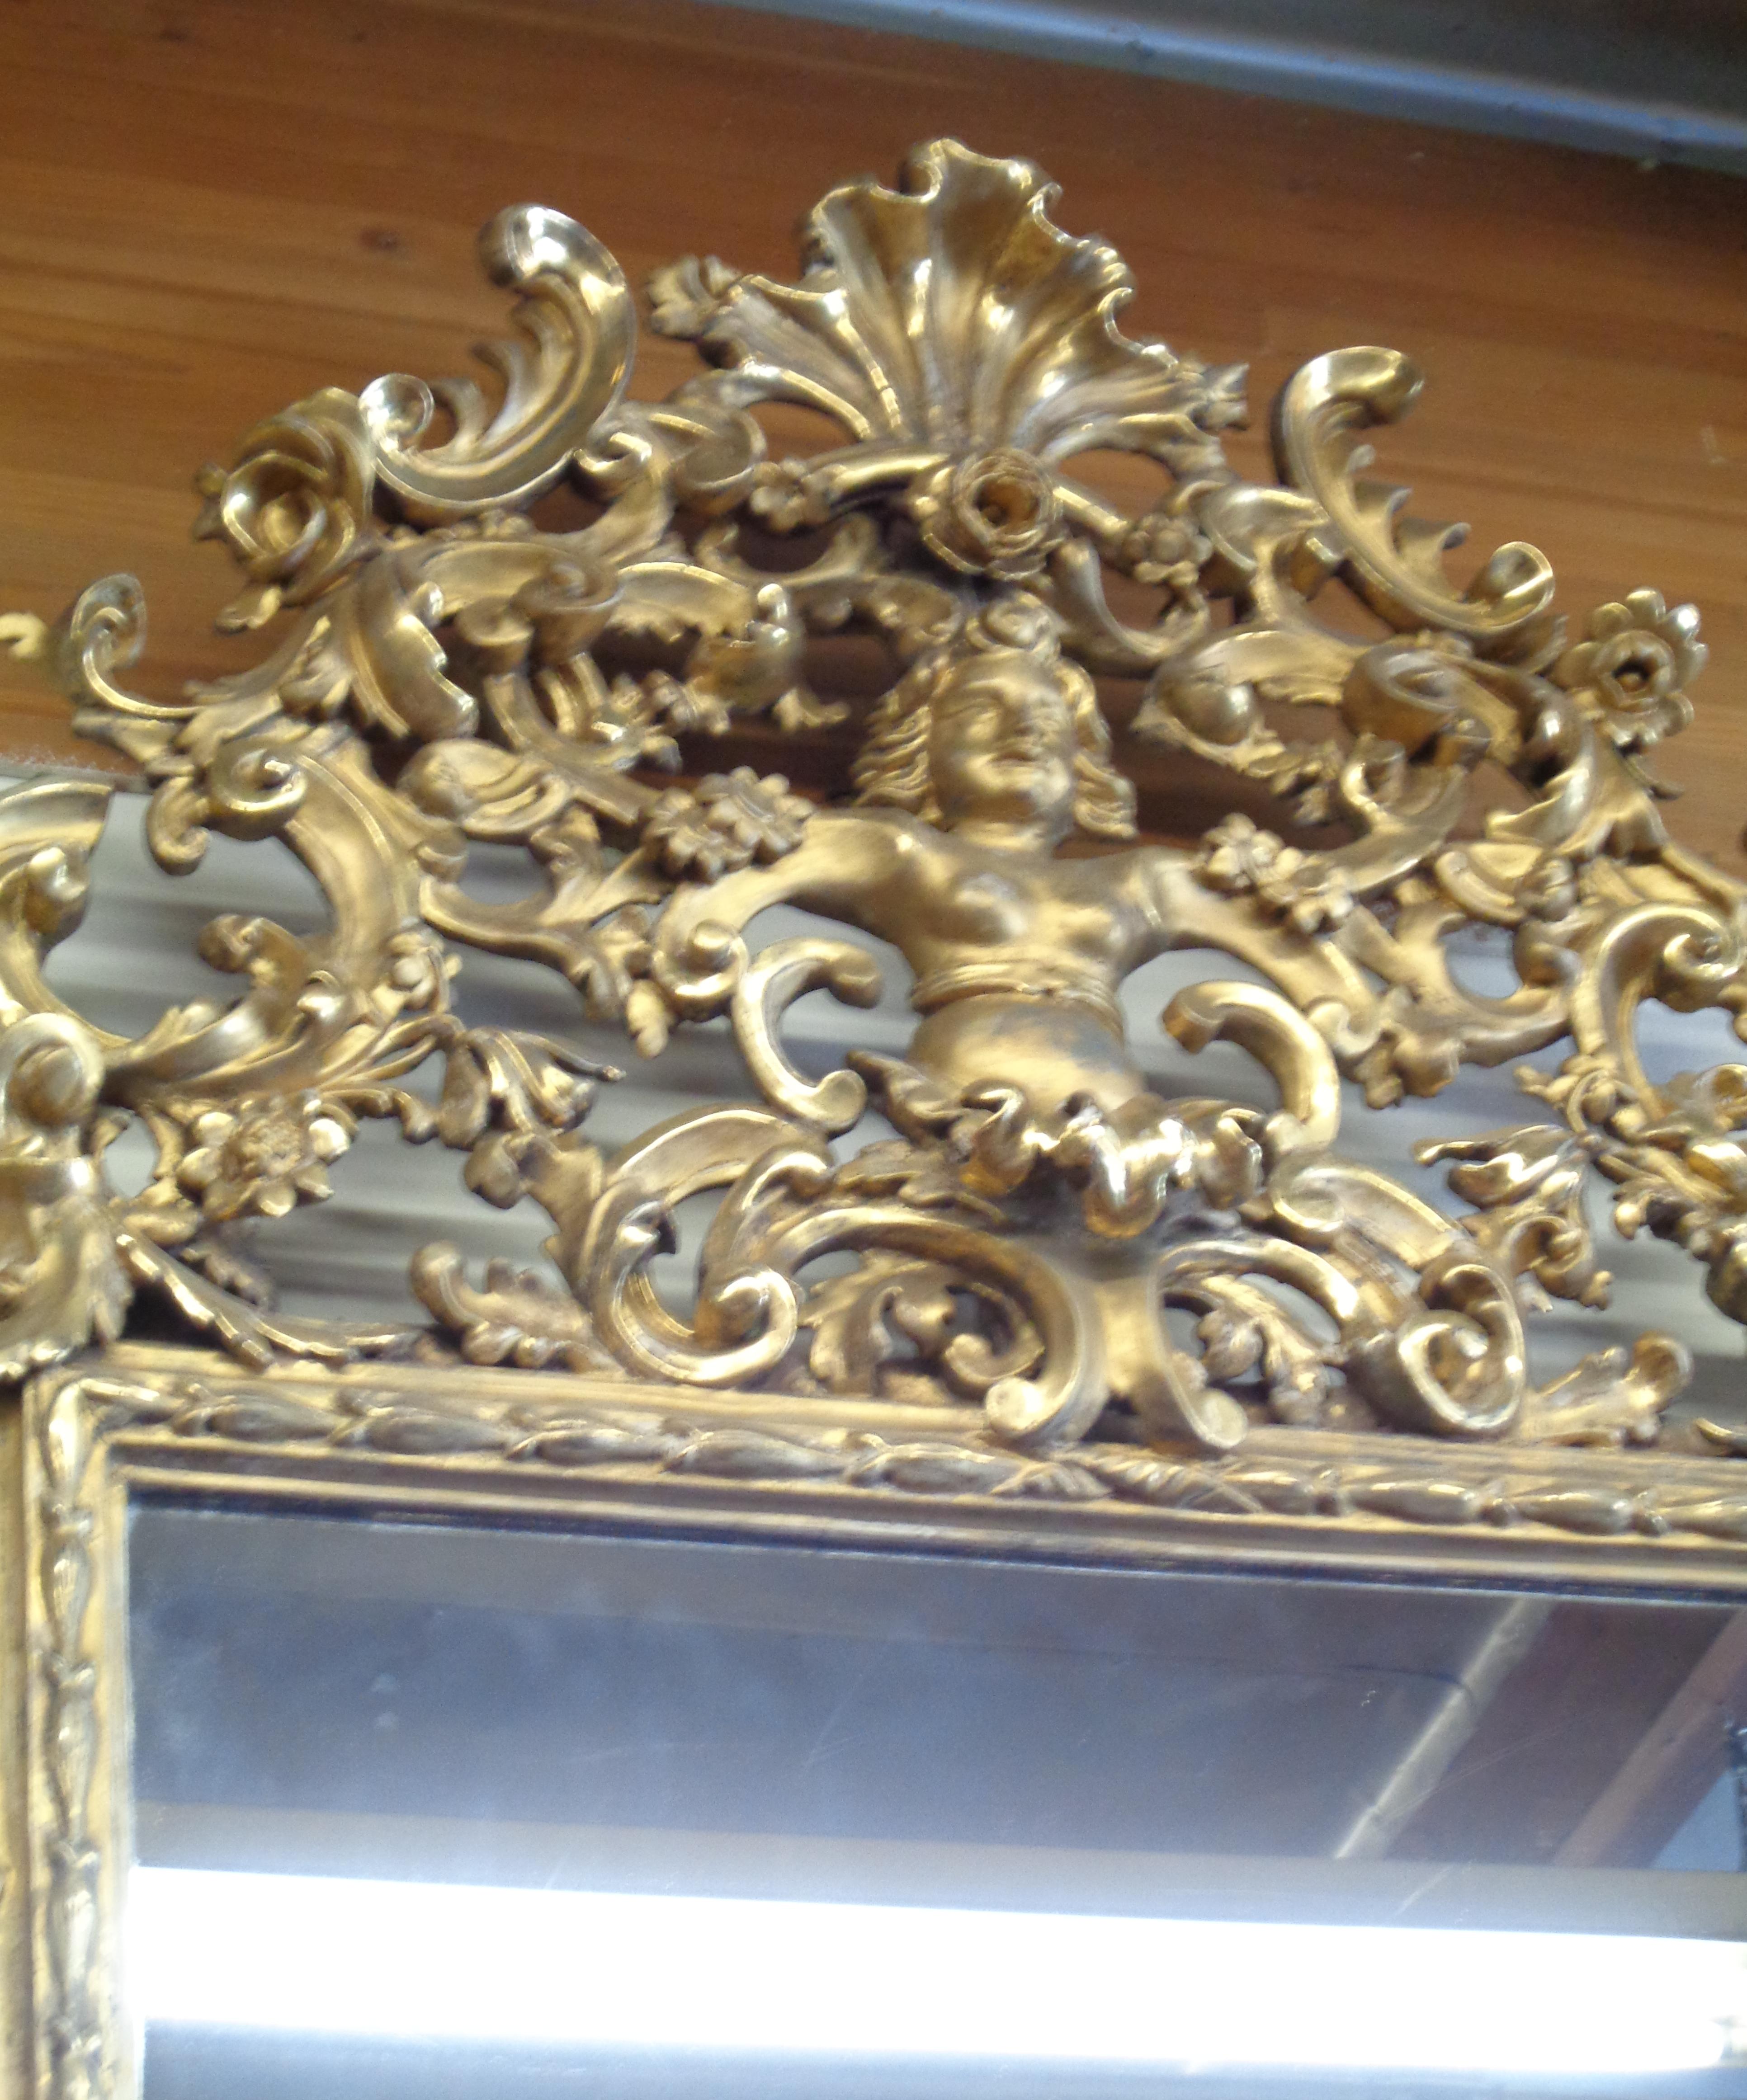 Palatial Italian three dimensionally carved and water gilt mirror. The mirror is magnificently carved throughout. The top of the mirror has a richly carved cornice with a coquille at the top below which is a stylized sea dolphin with a female head.